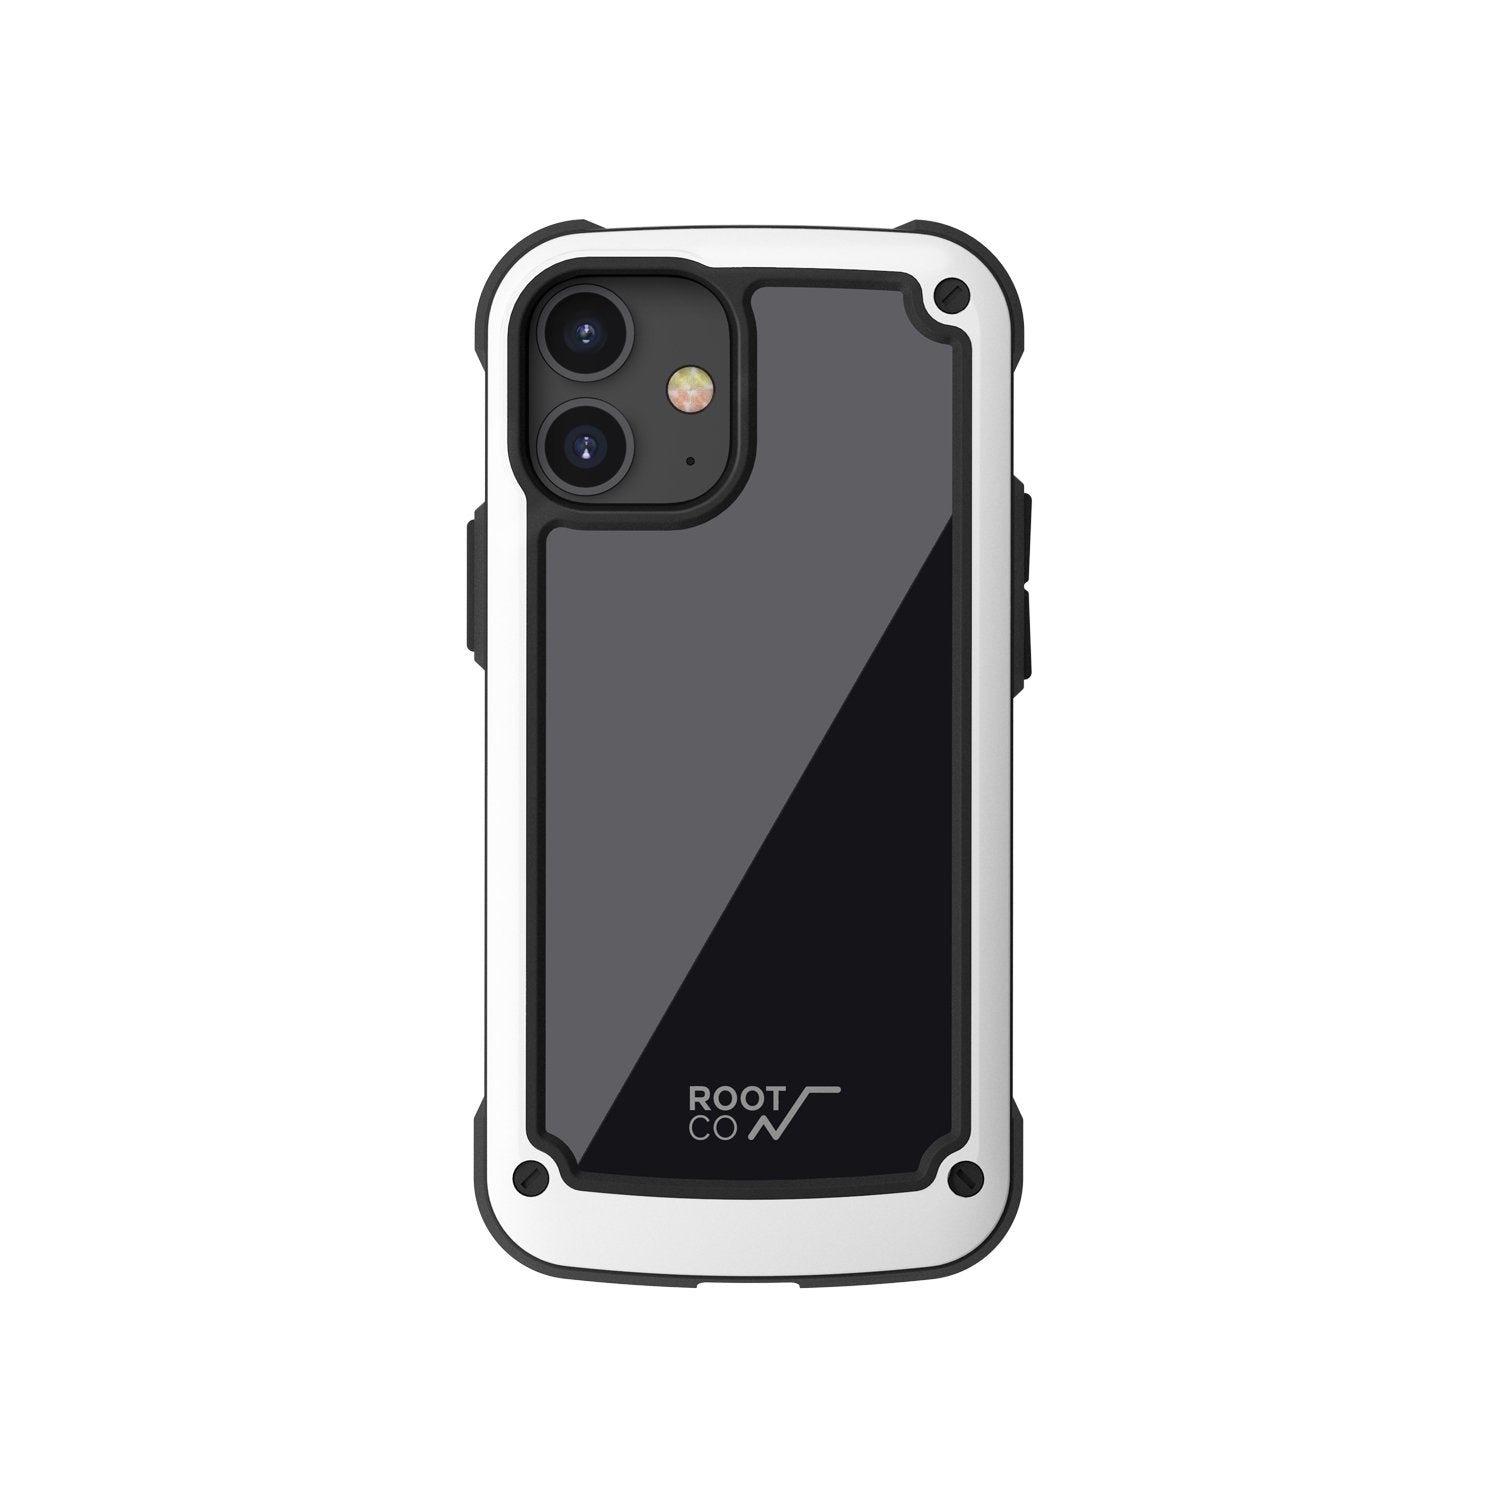 ROOT CO. Gravity Shock Resist Tough & Basic Case for iPhone 12 mini 5.4"(2020), White Default ROOT CO. 